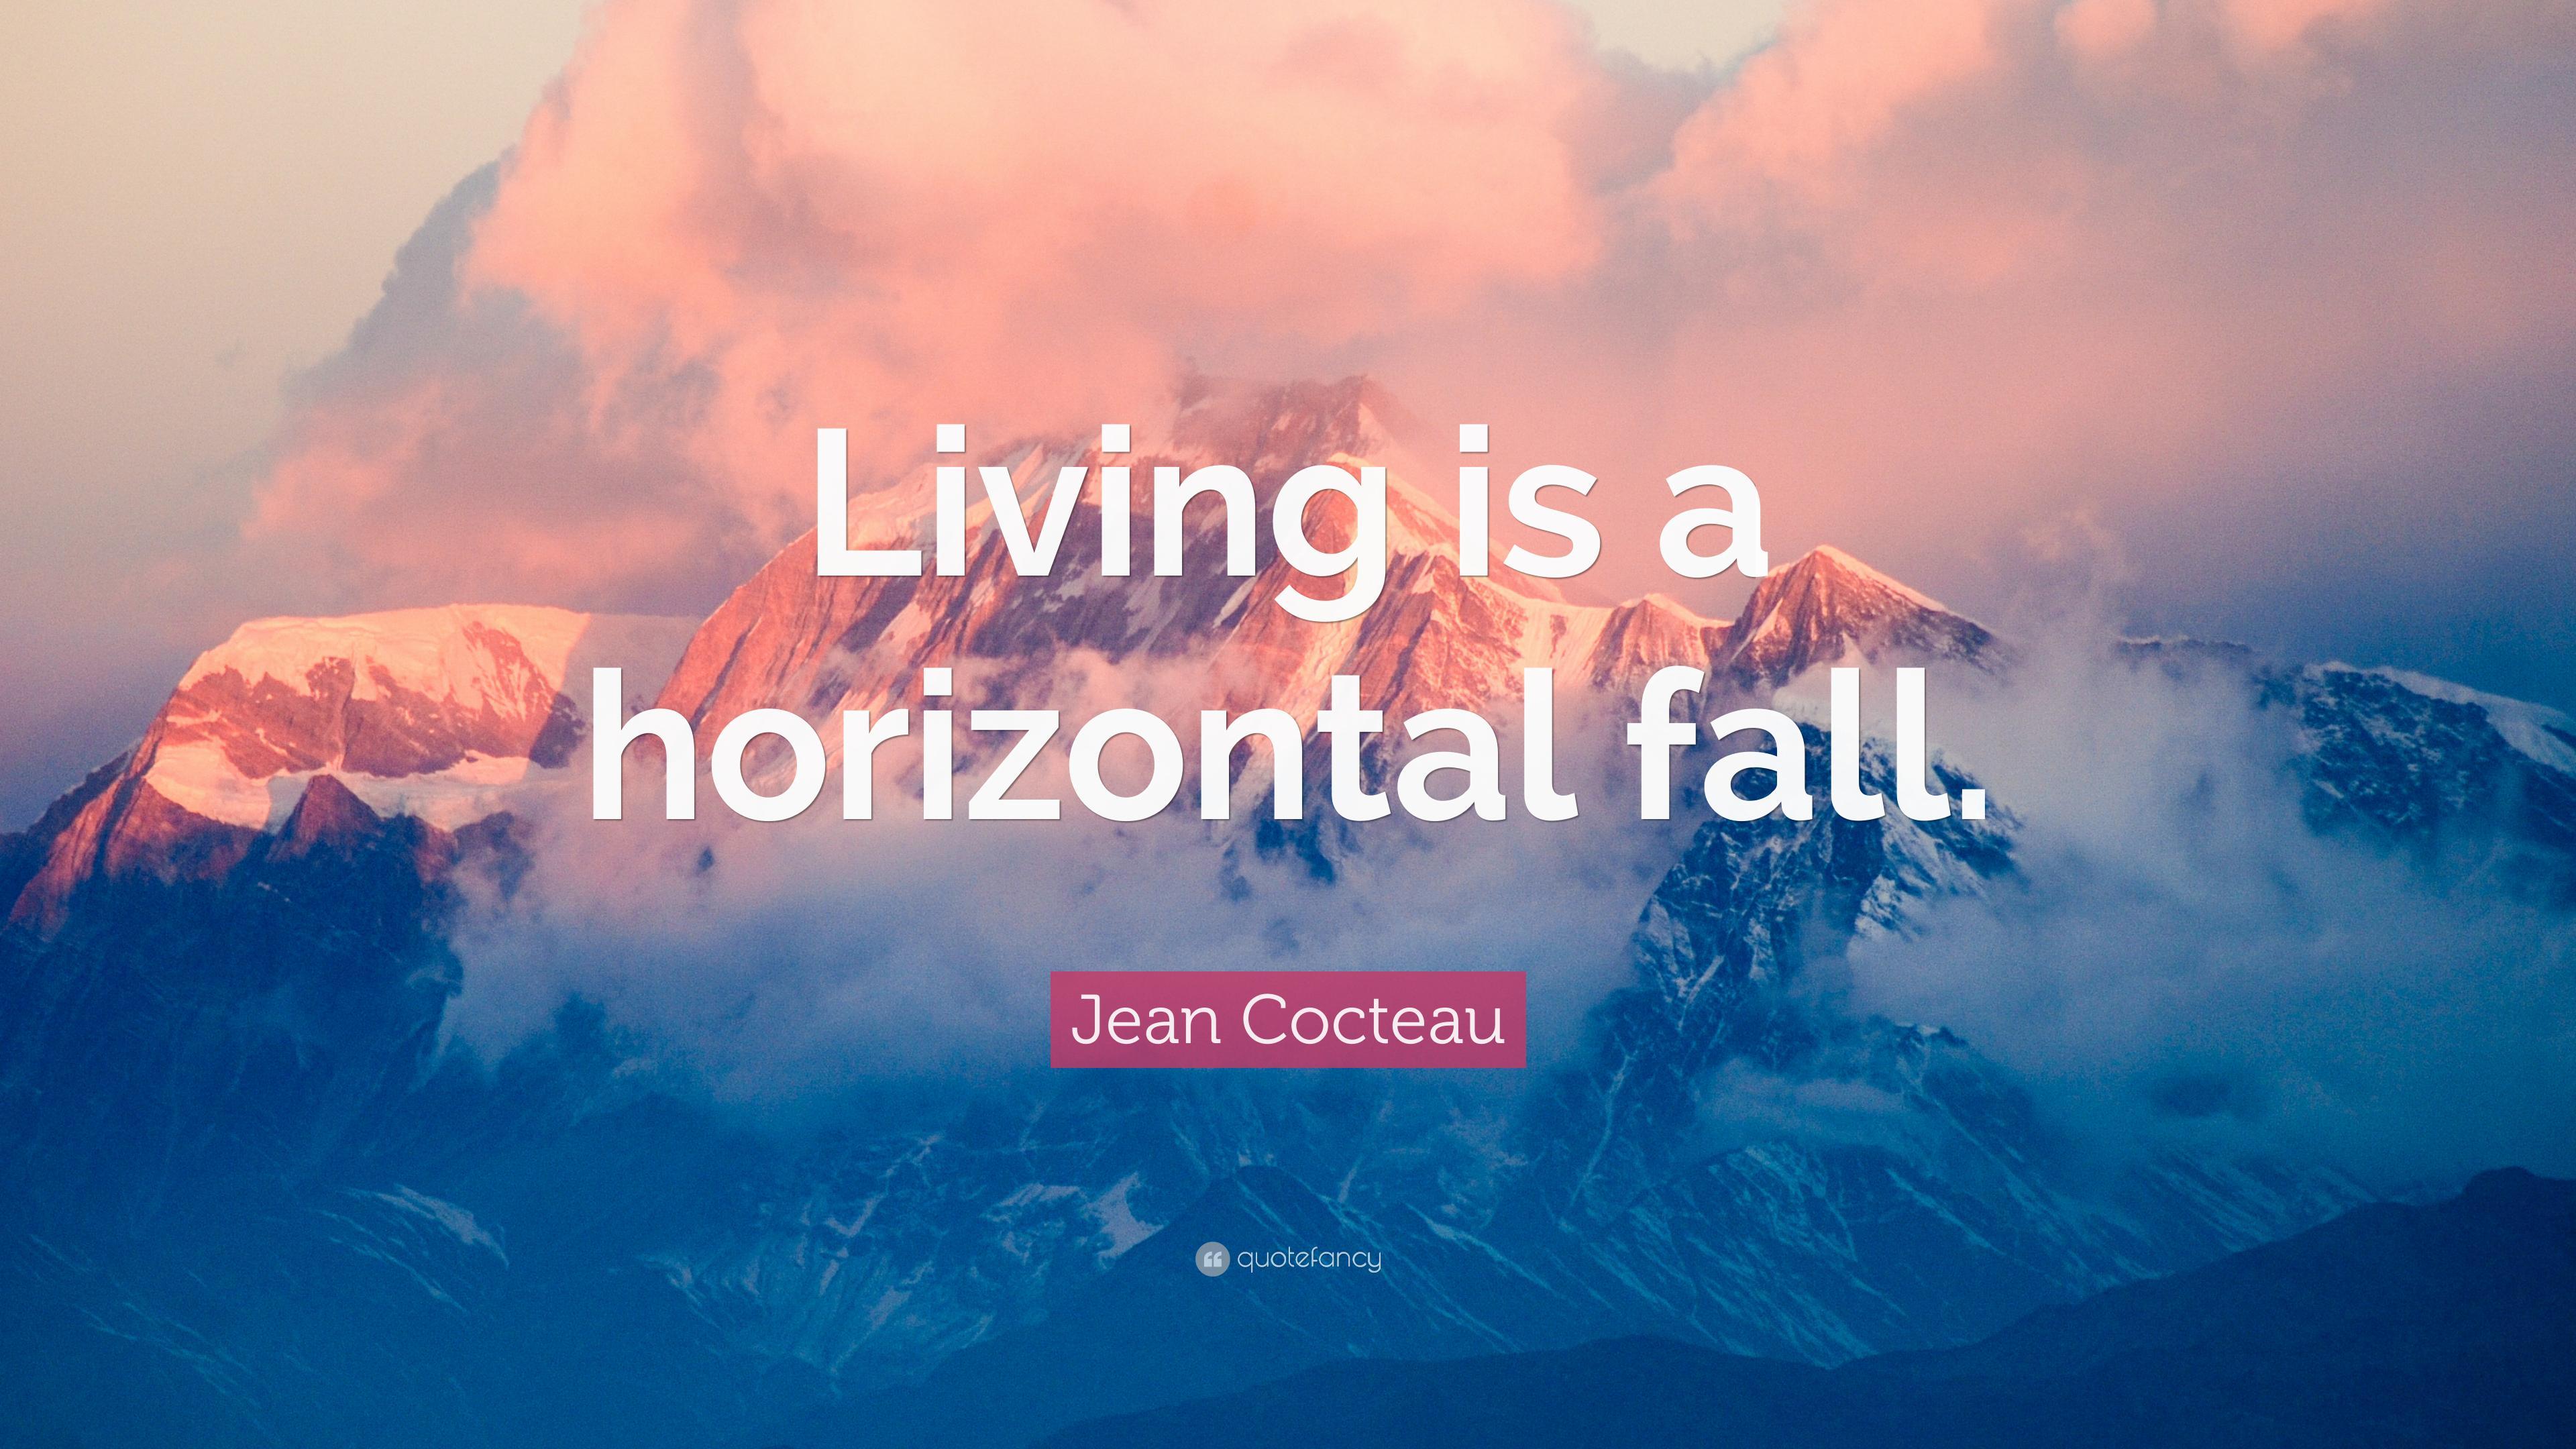 Jean Cocteau Quote: “Living is a horizontal fall.” 6 wallpaper